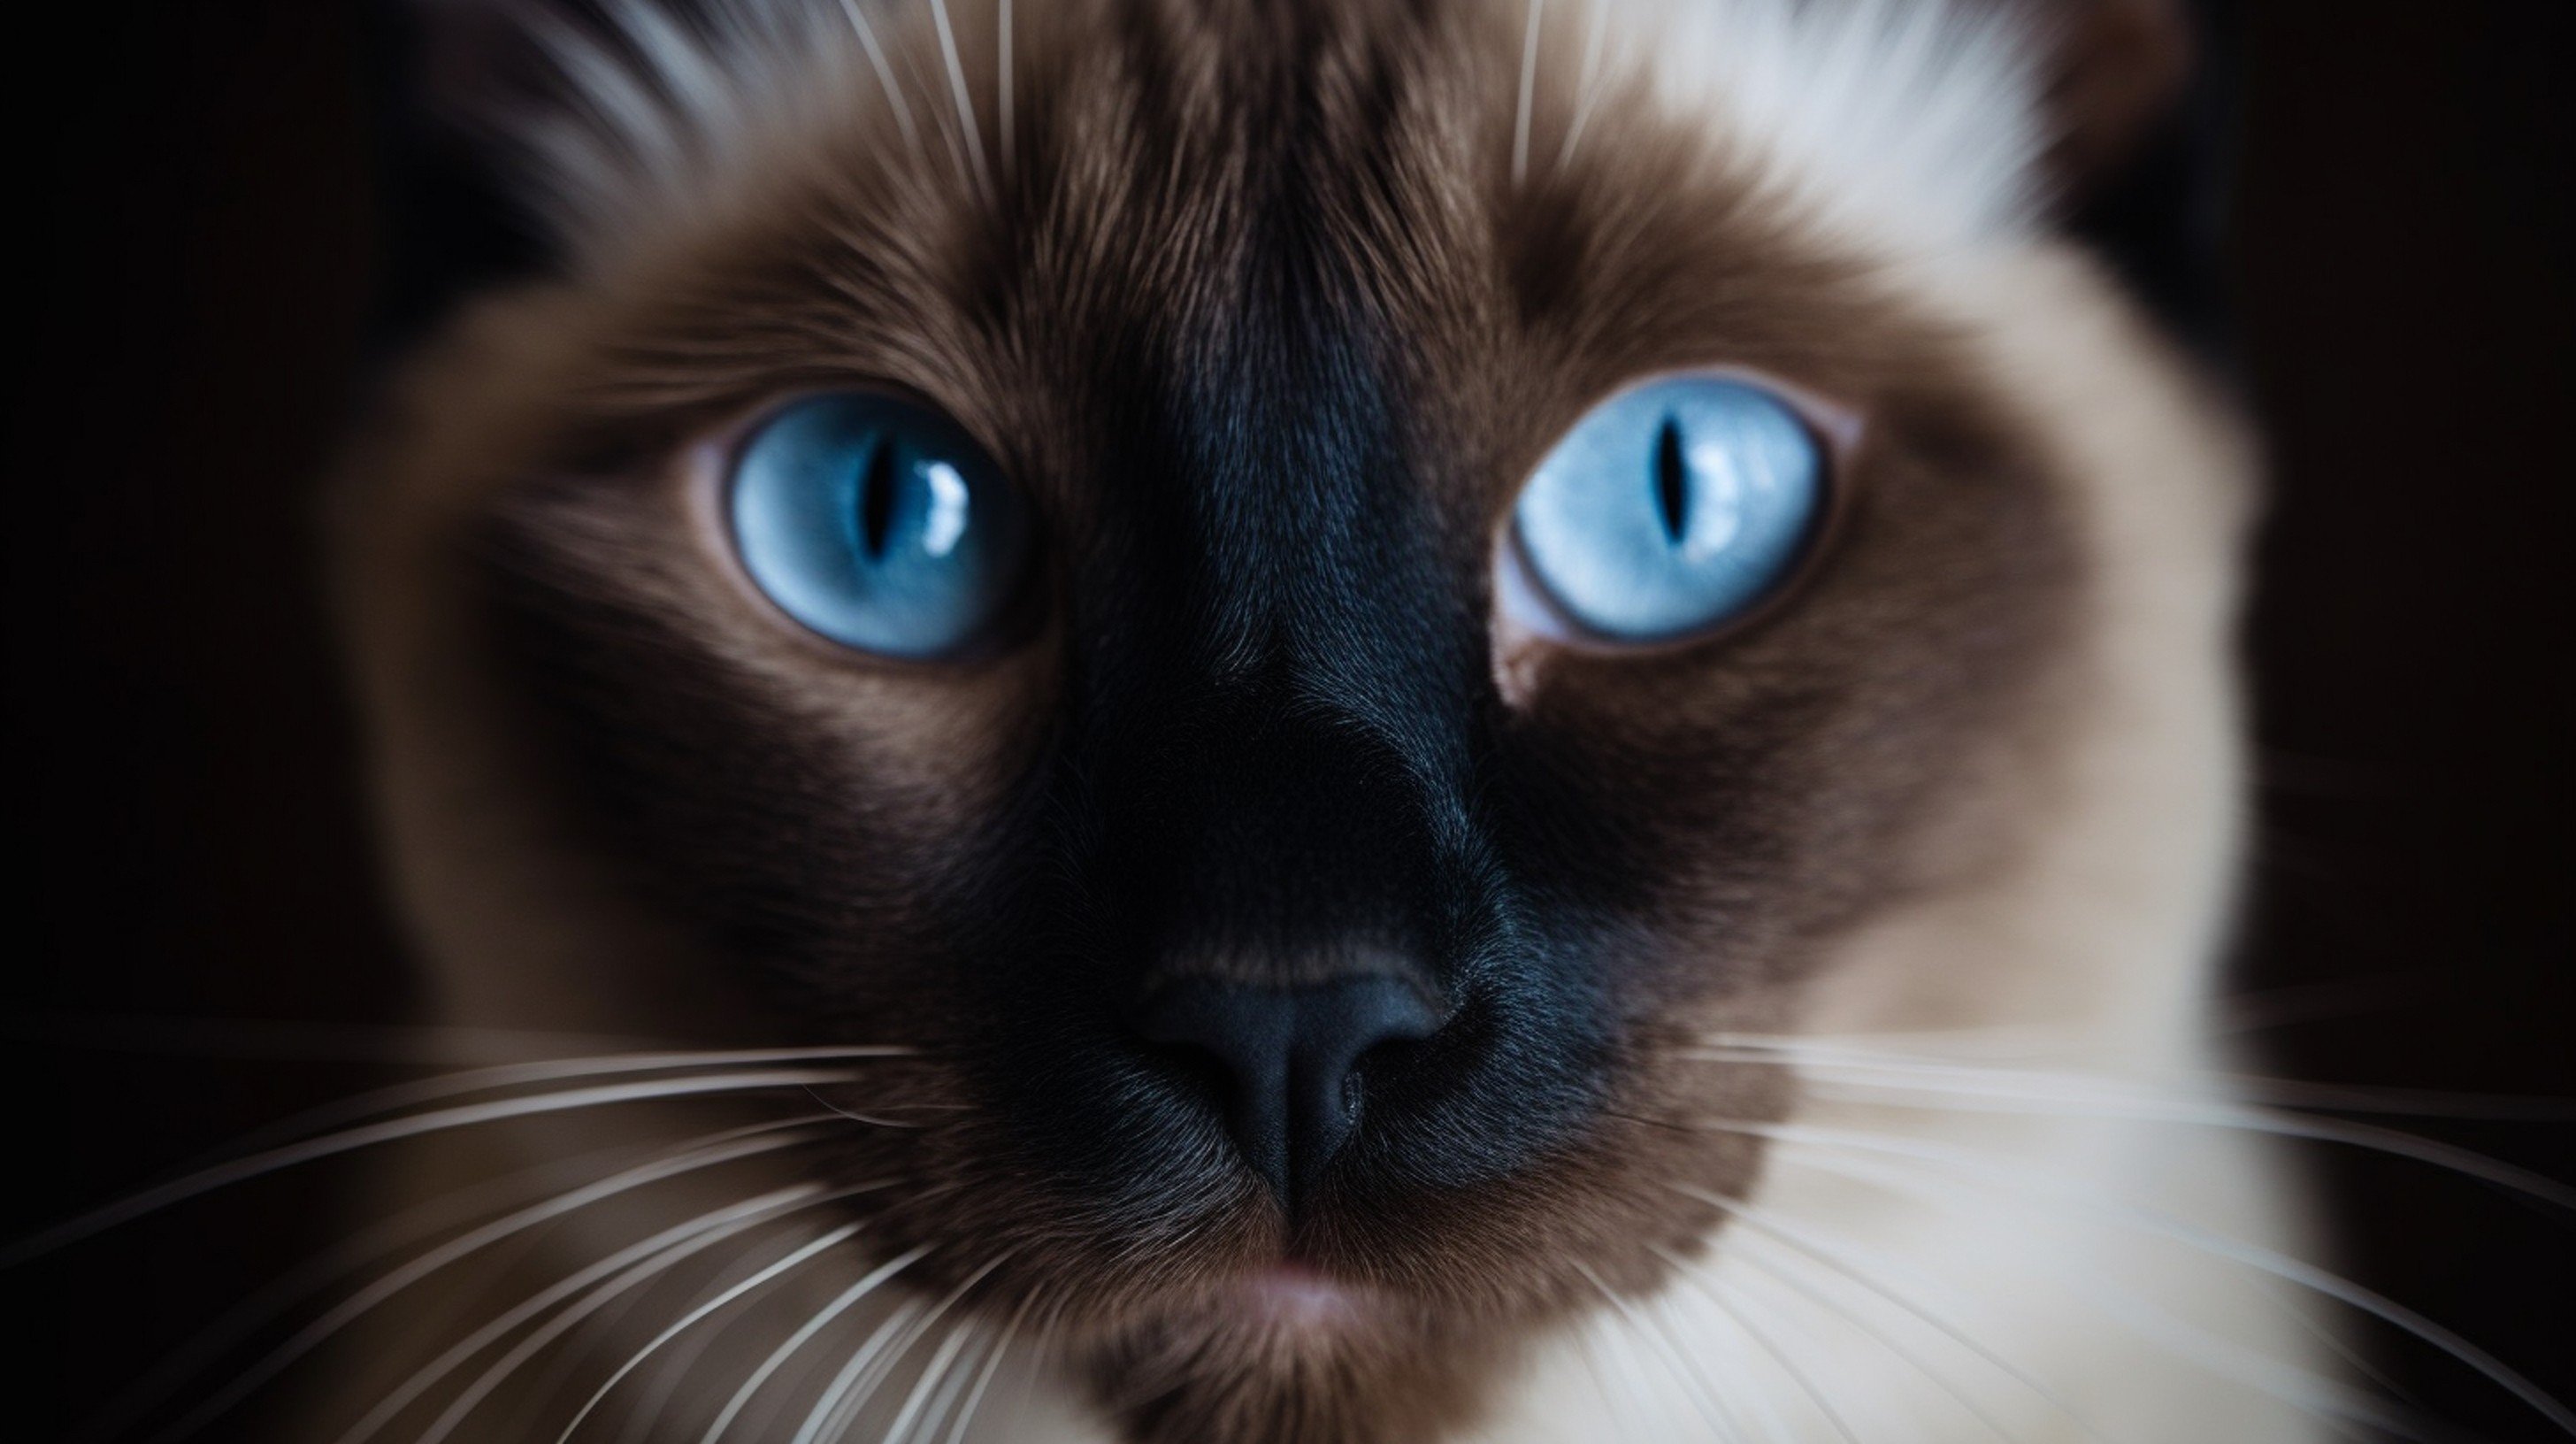 Cats’ eyes are adapted to give them superior vision in low light conditions. They have slit pupils, large corneas, and more light-detecting cells than the human eye, reflecting their habit in the wild of hunting prey at dusk and dawn. Photo: Shutterstock